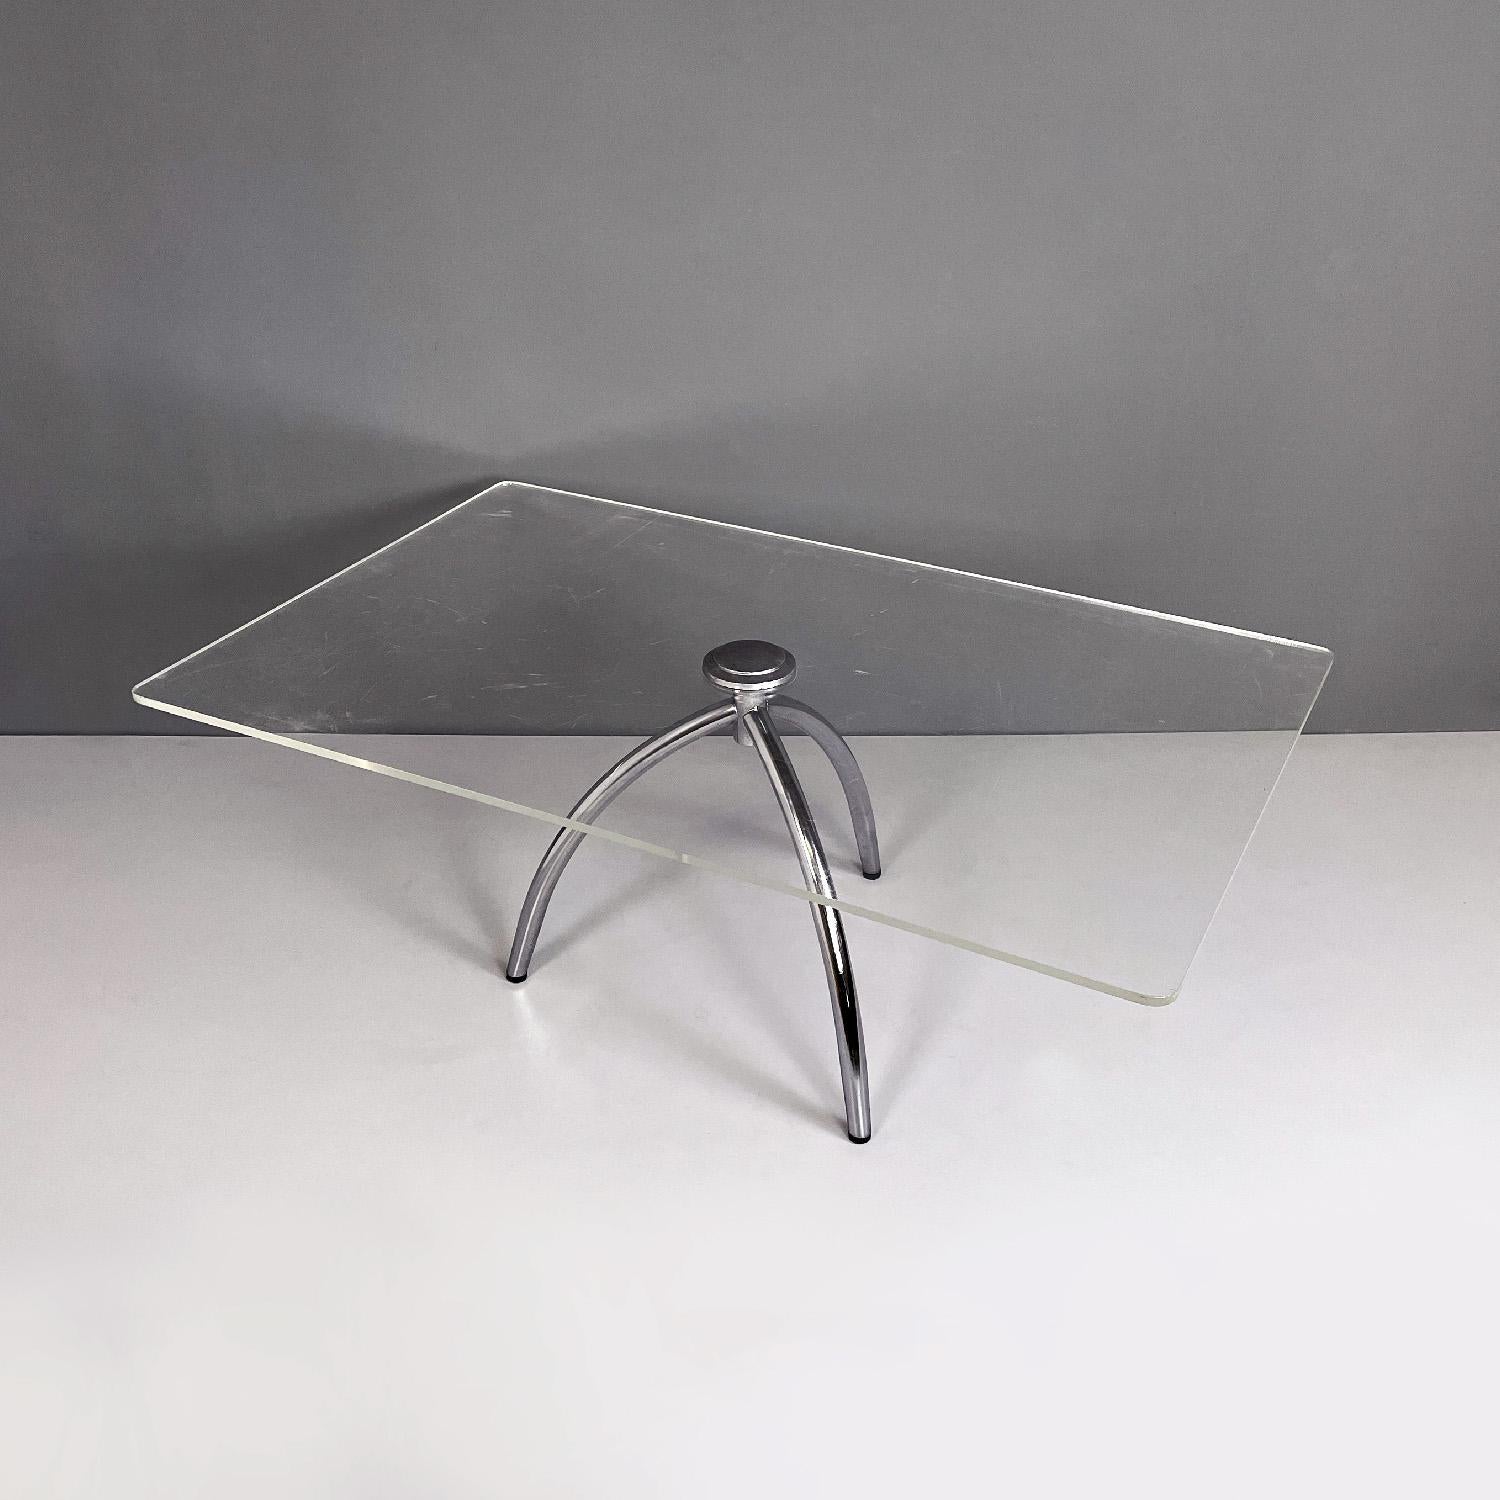 Italian modern coffee table transparent plexiglass and aluminum structure, 1980s
Coffee table with rectangular transparent plexiglass top. On the top there is a round aluminum element that connects it to the structure, also in aluminum and composed